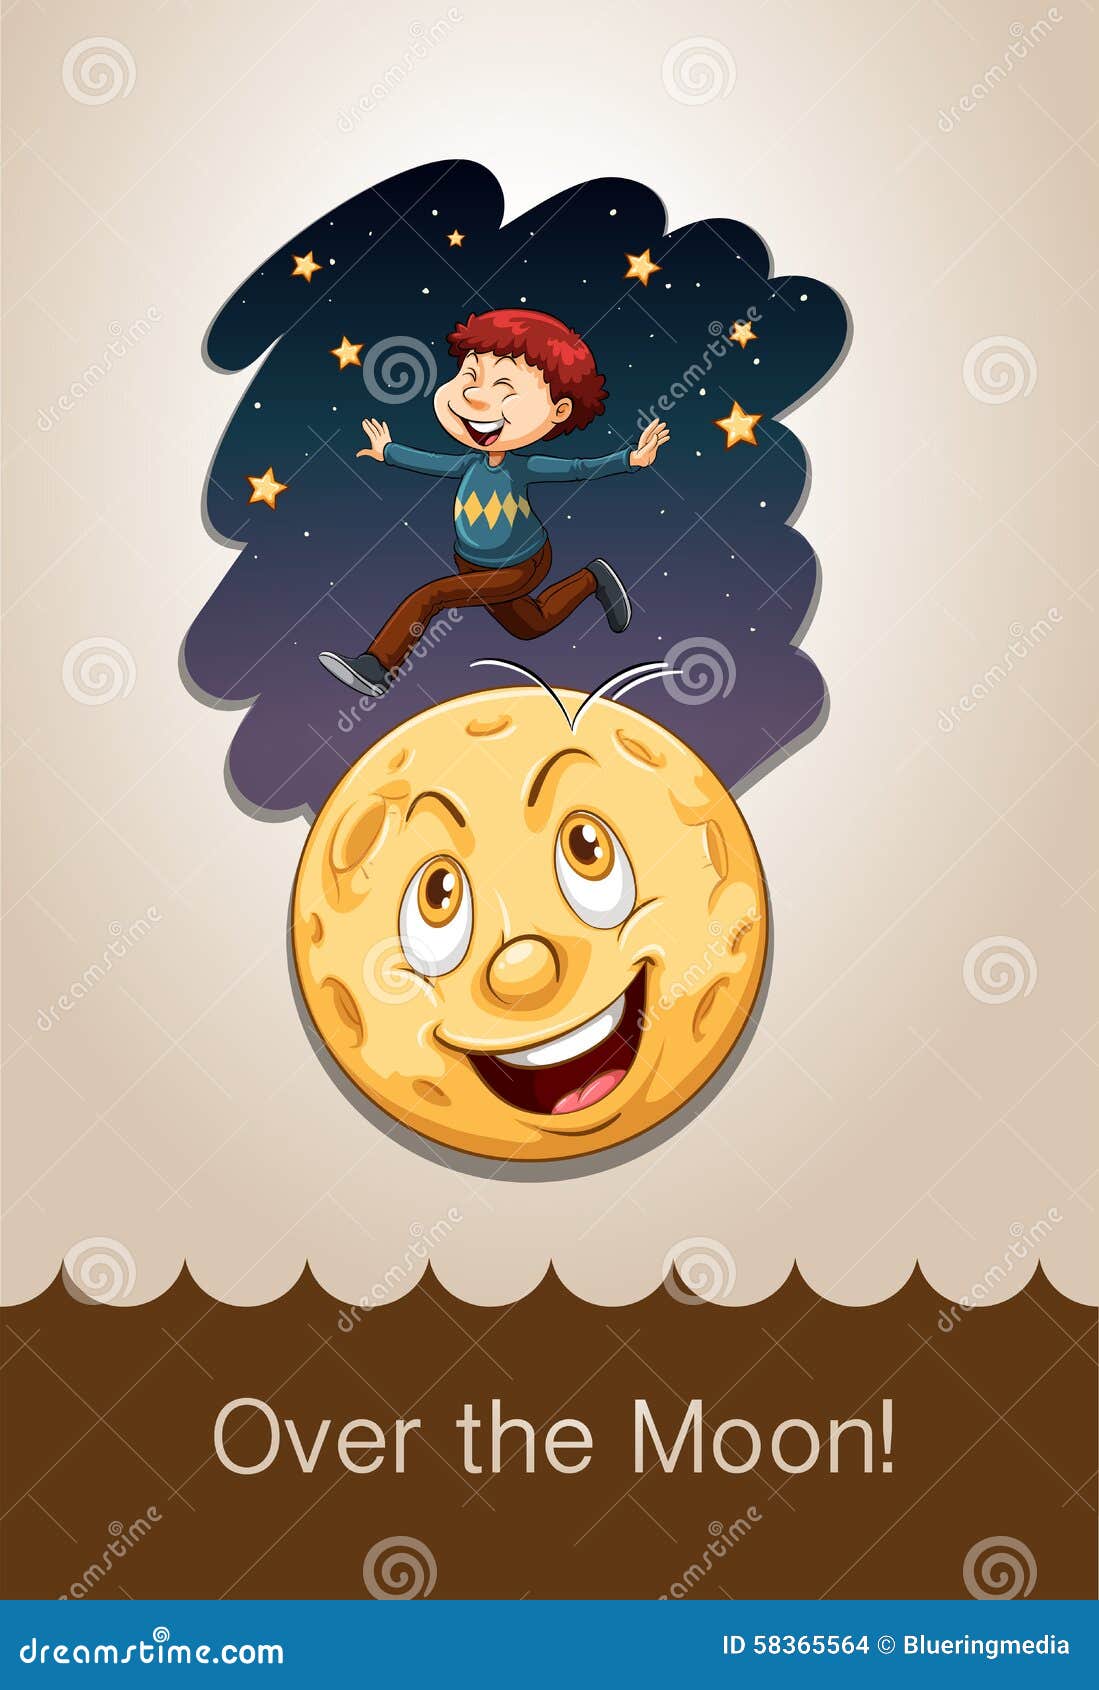 Moon idioms. Over the Moon идиома. To be over the Moon идиома. Over the Moon idiom. Be over the Moon.